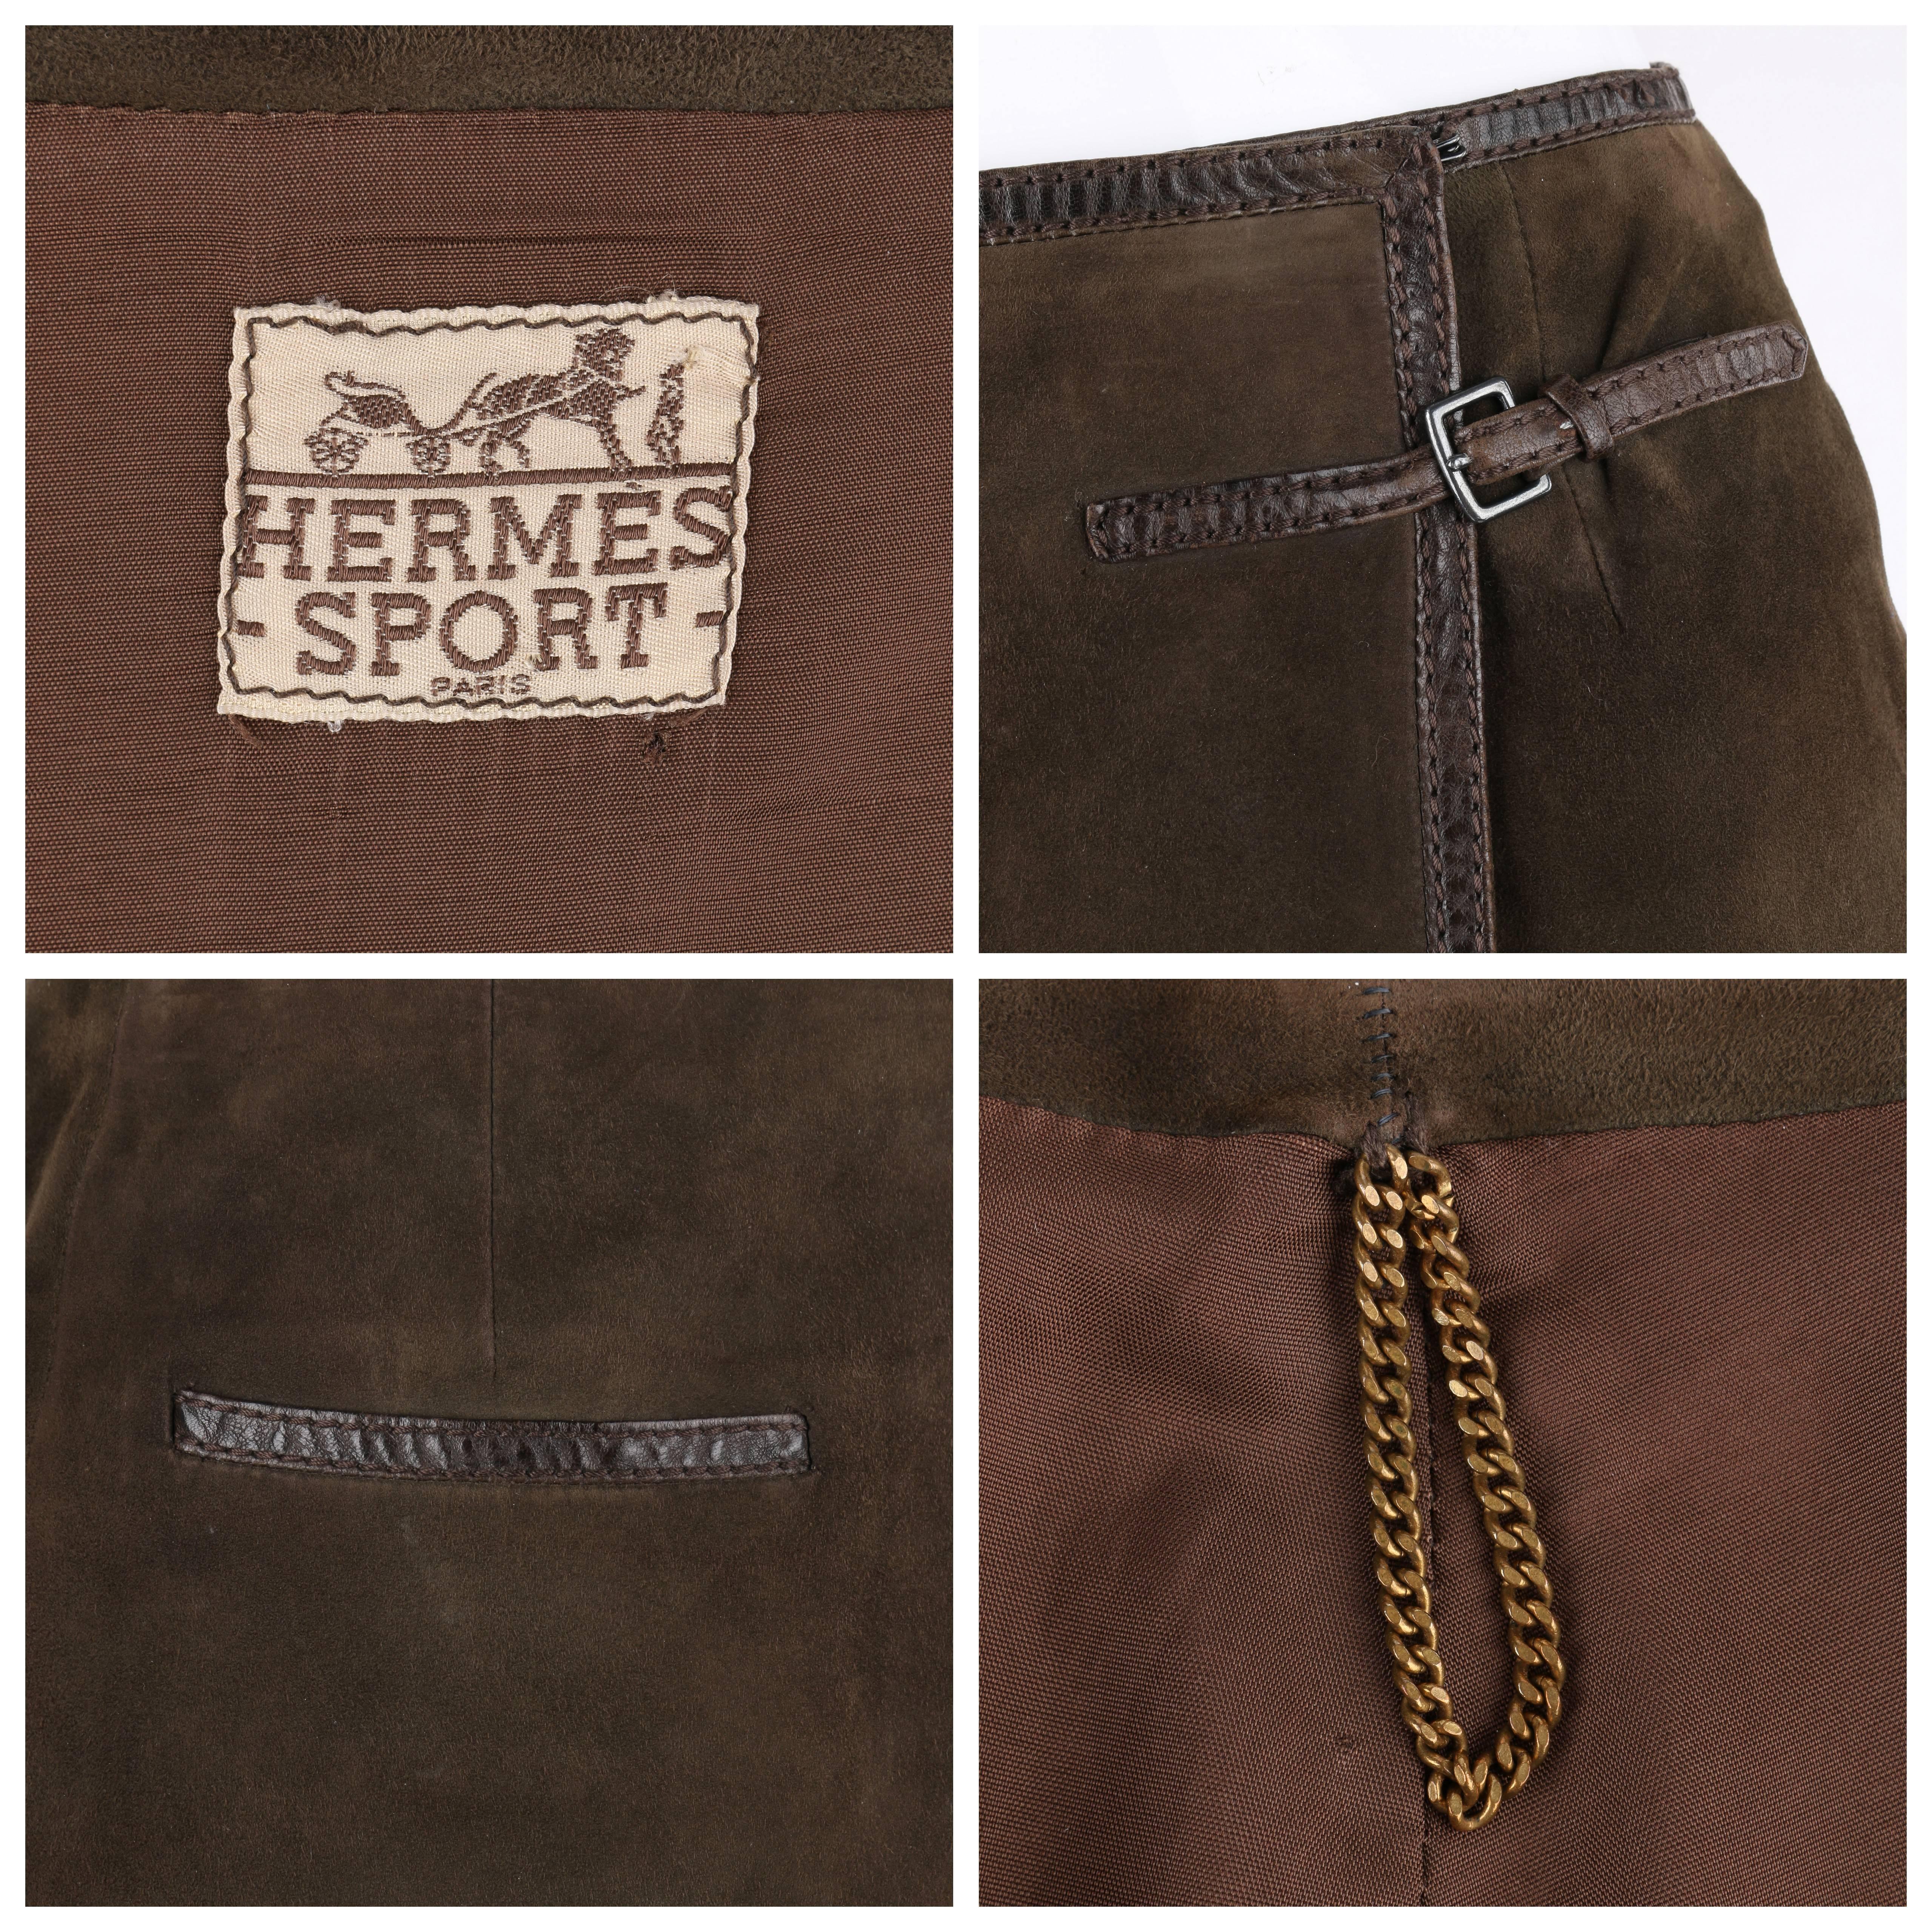 HERMES Sport c.1970's Brown Suede Leather Wrap Skirt 2